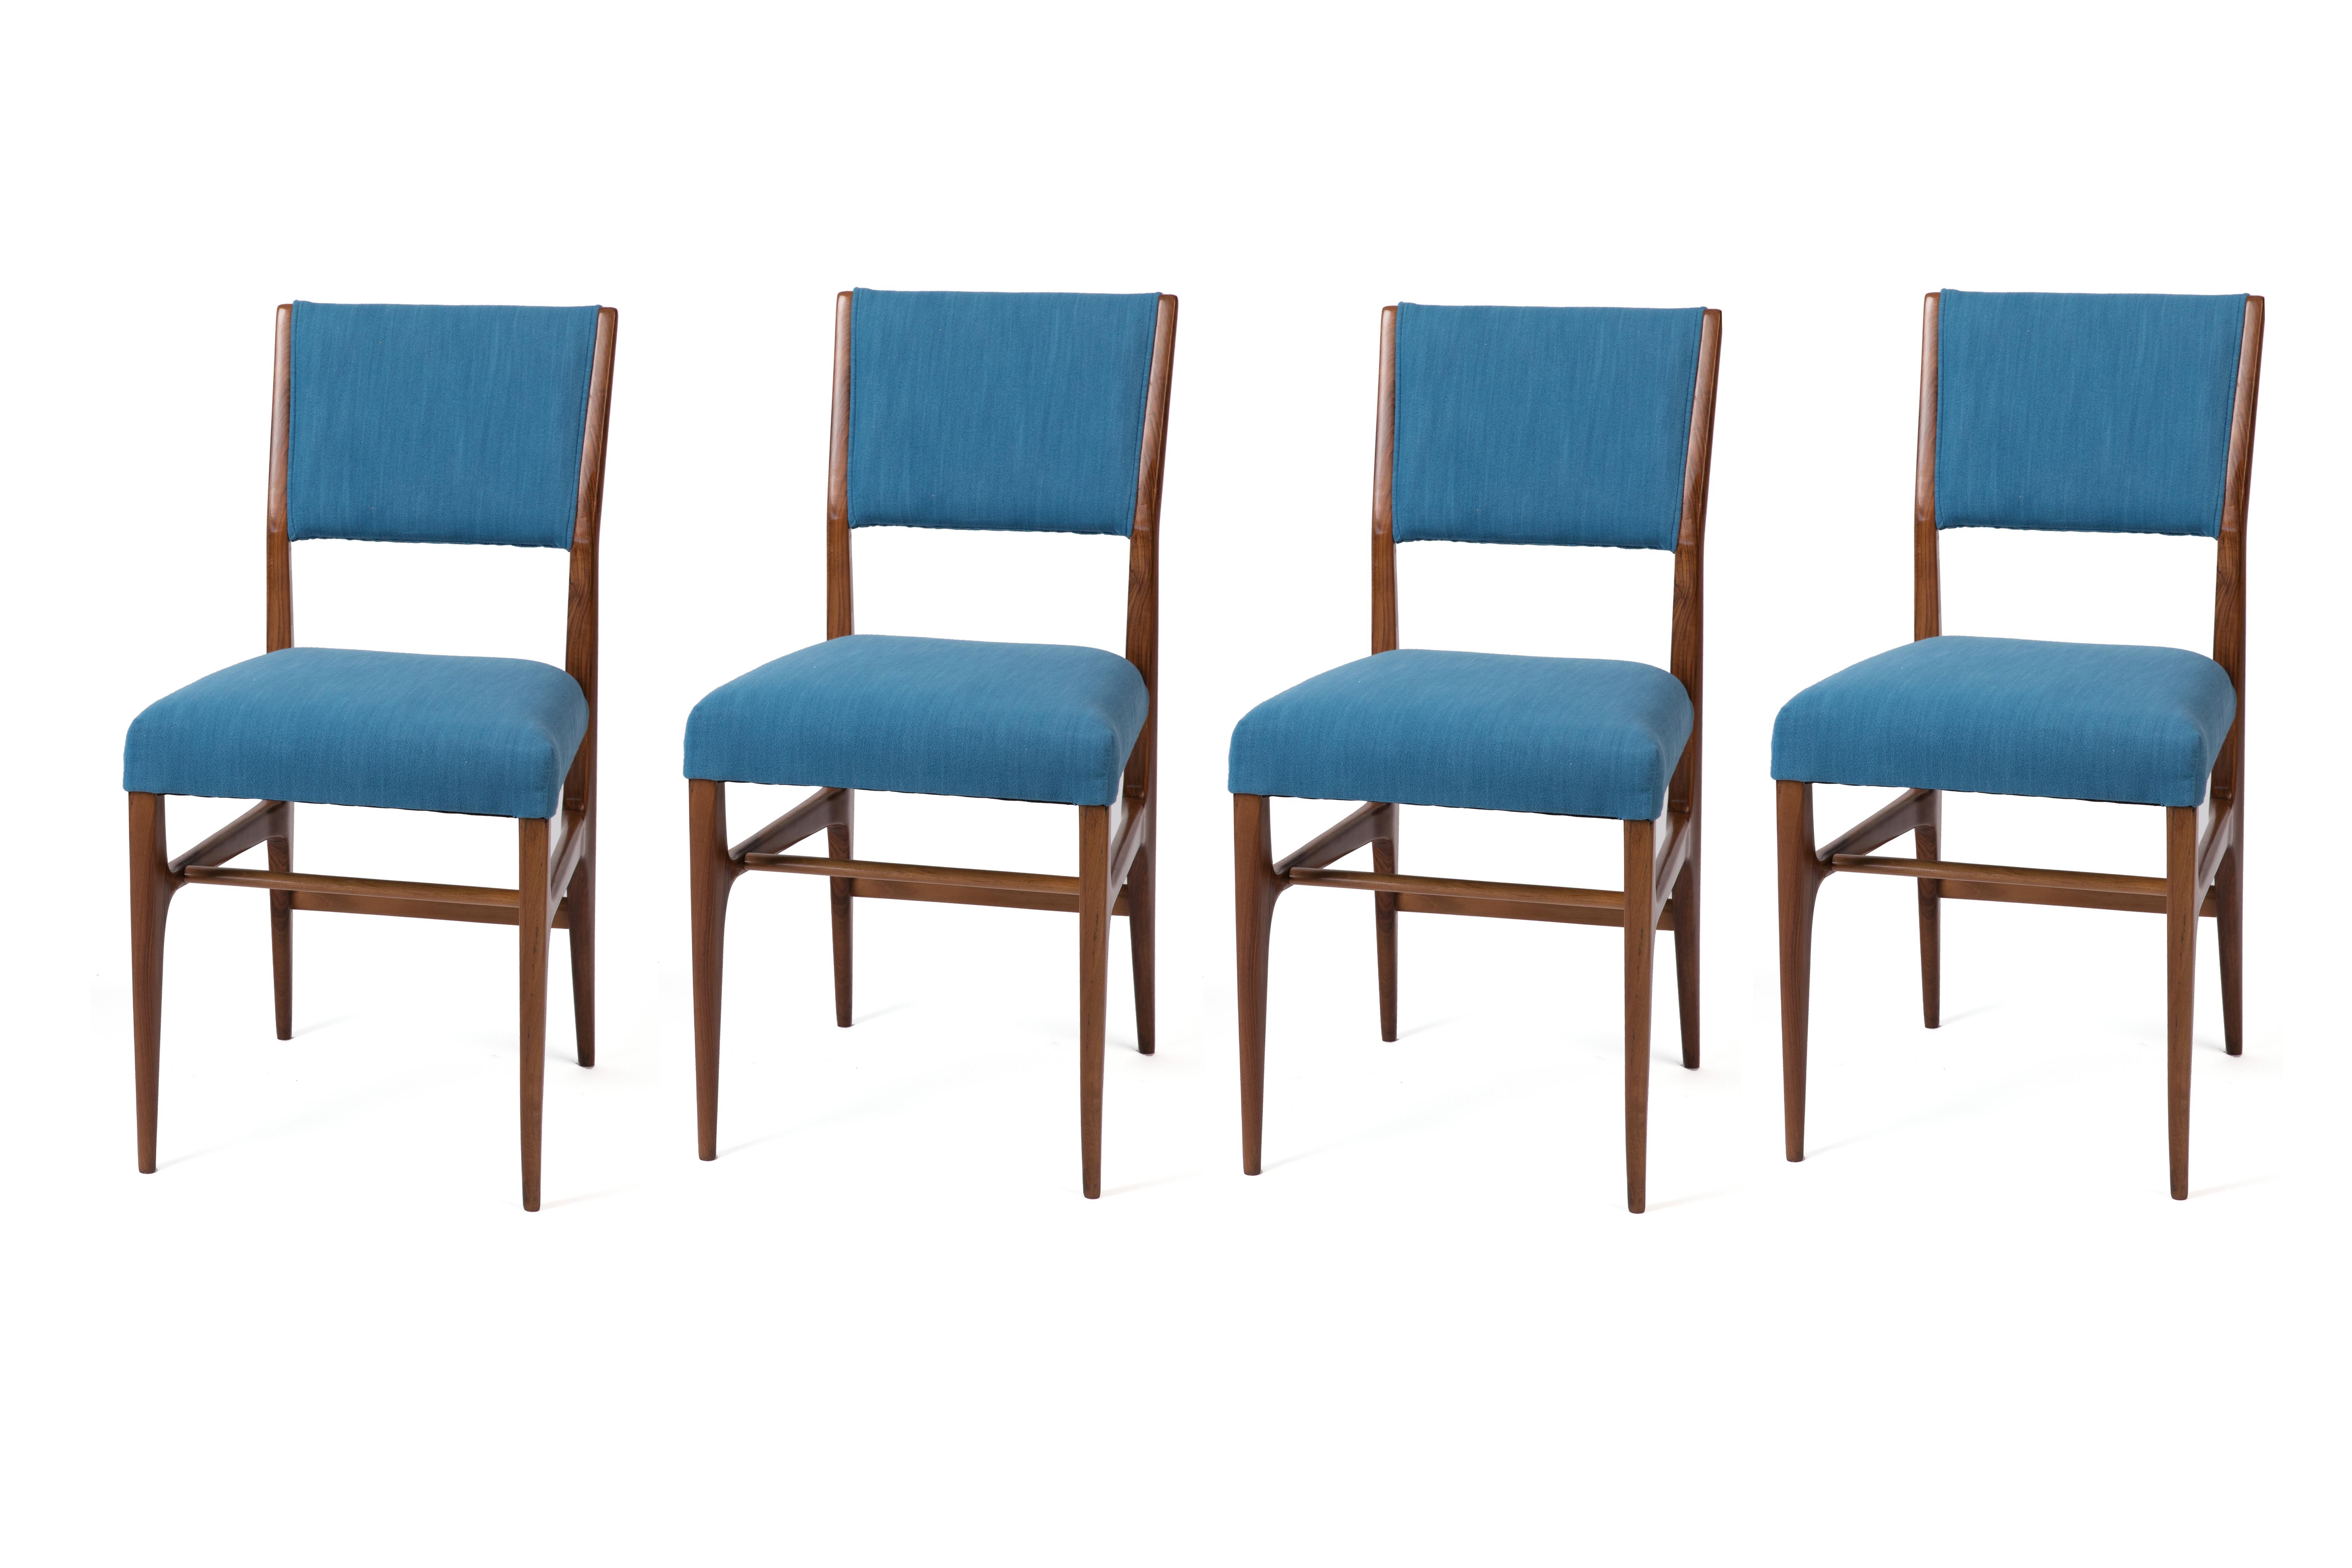 Set of four walnut dining chairs designed by Gio Ponti and manufactured by Cassina for Singer & Sons in the 1950s. Newly refinished and upholstered in a bright, velvety blue jewel tone. Price listed is for the set of 4.